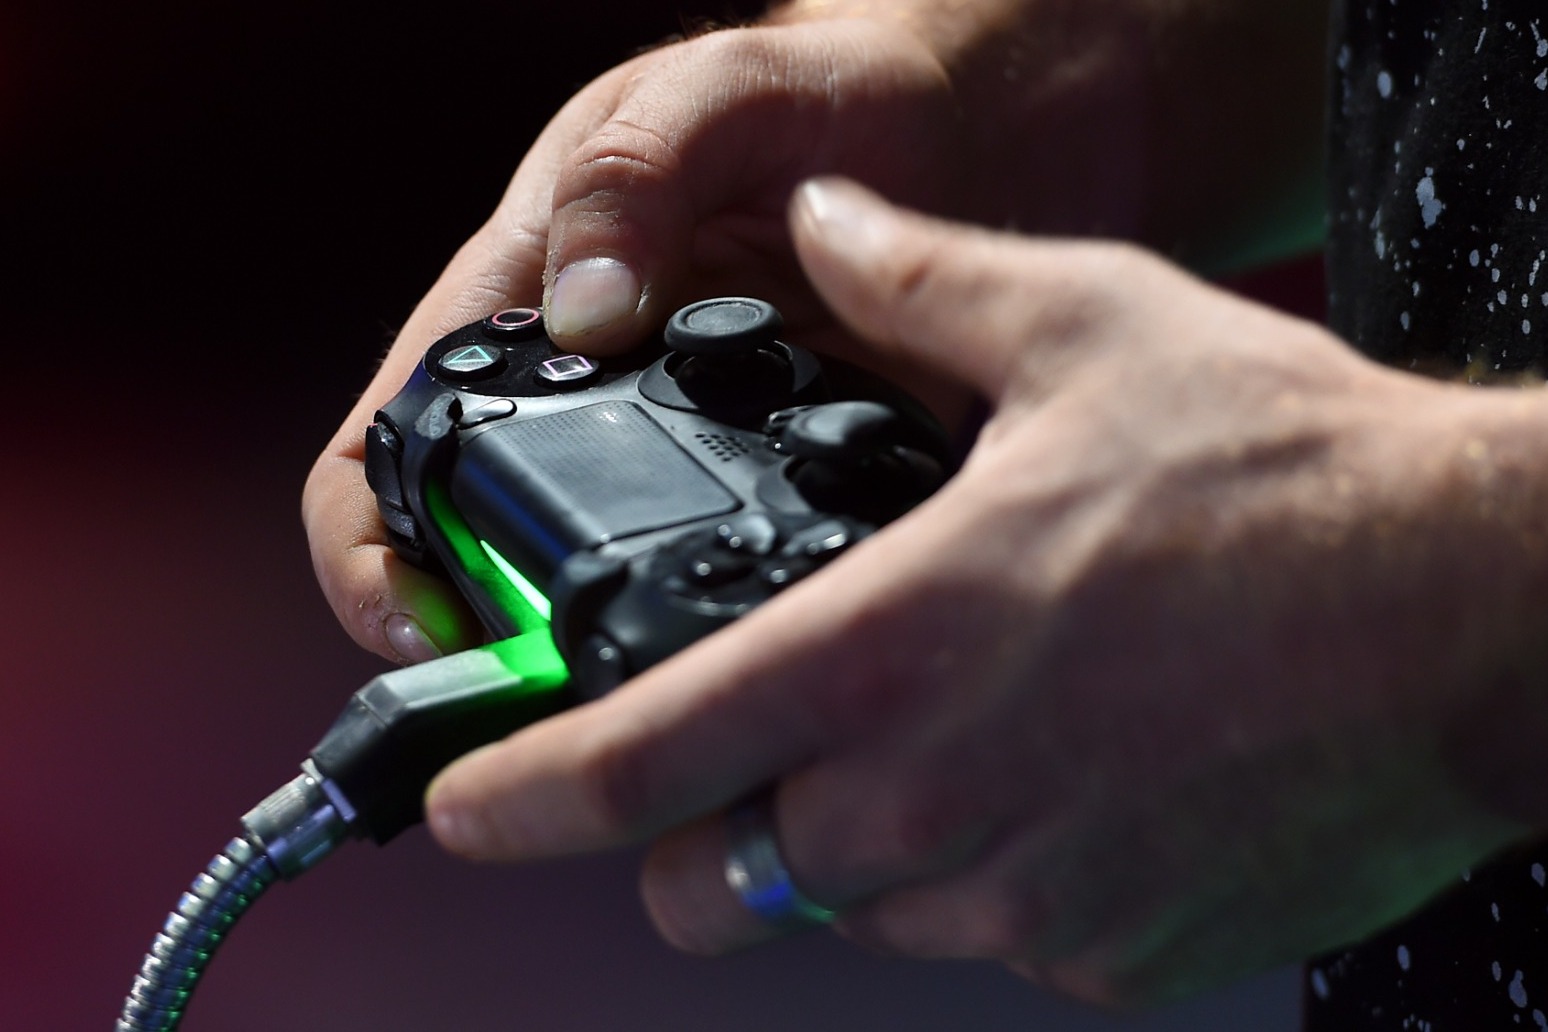 Gamers cut spending to keep playing as cost of living rises 